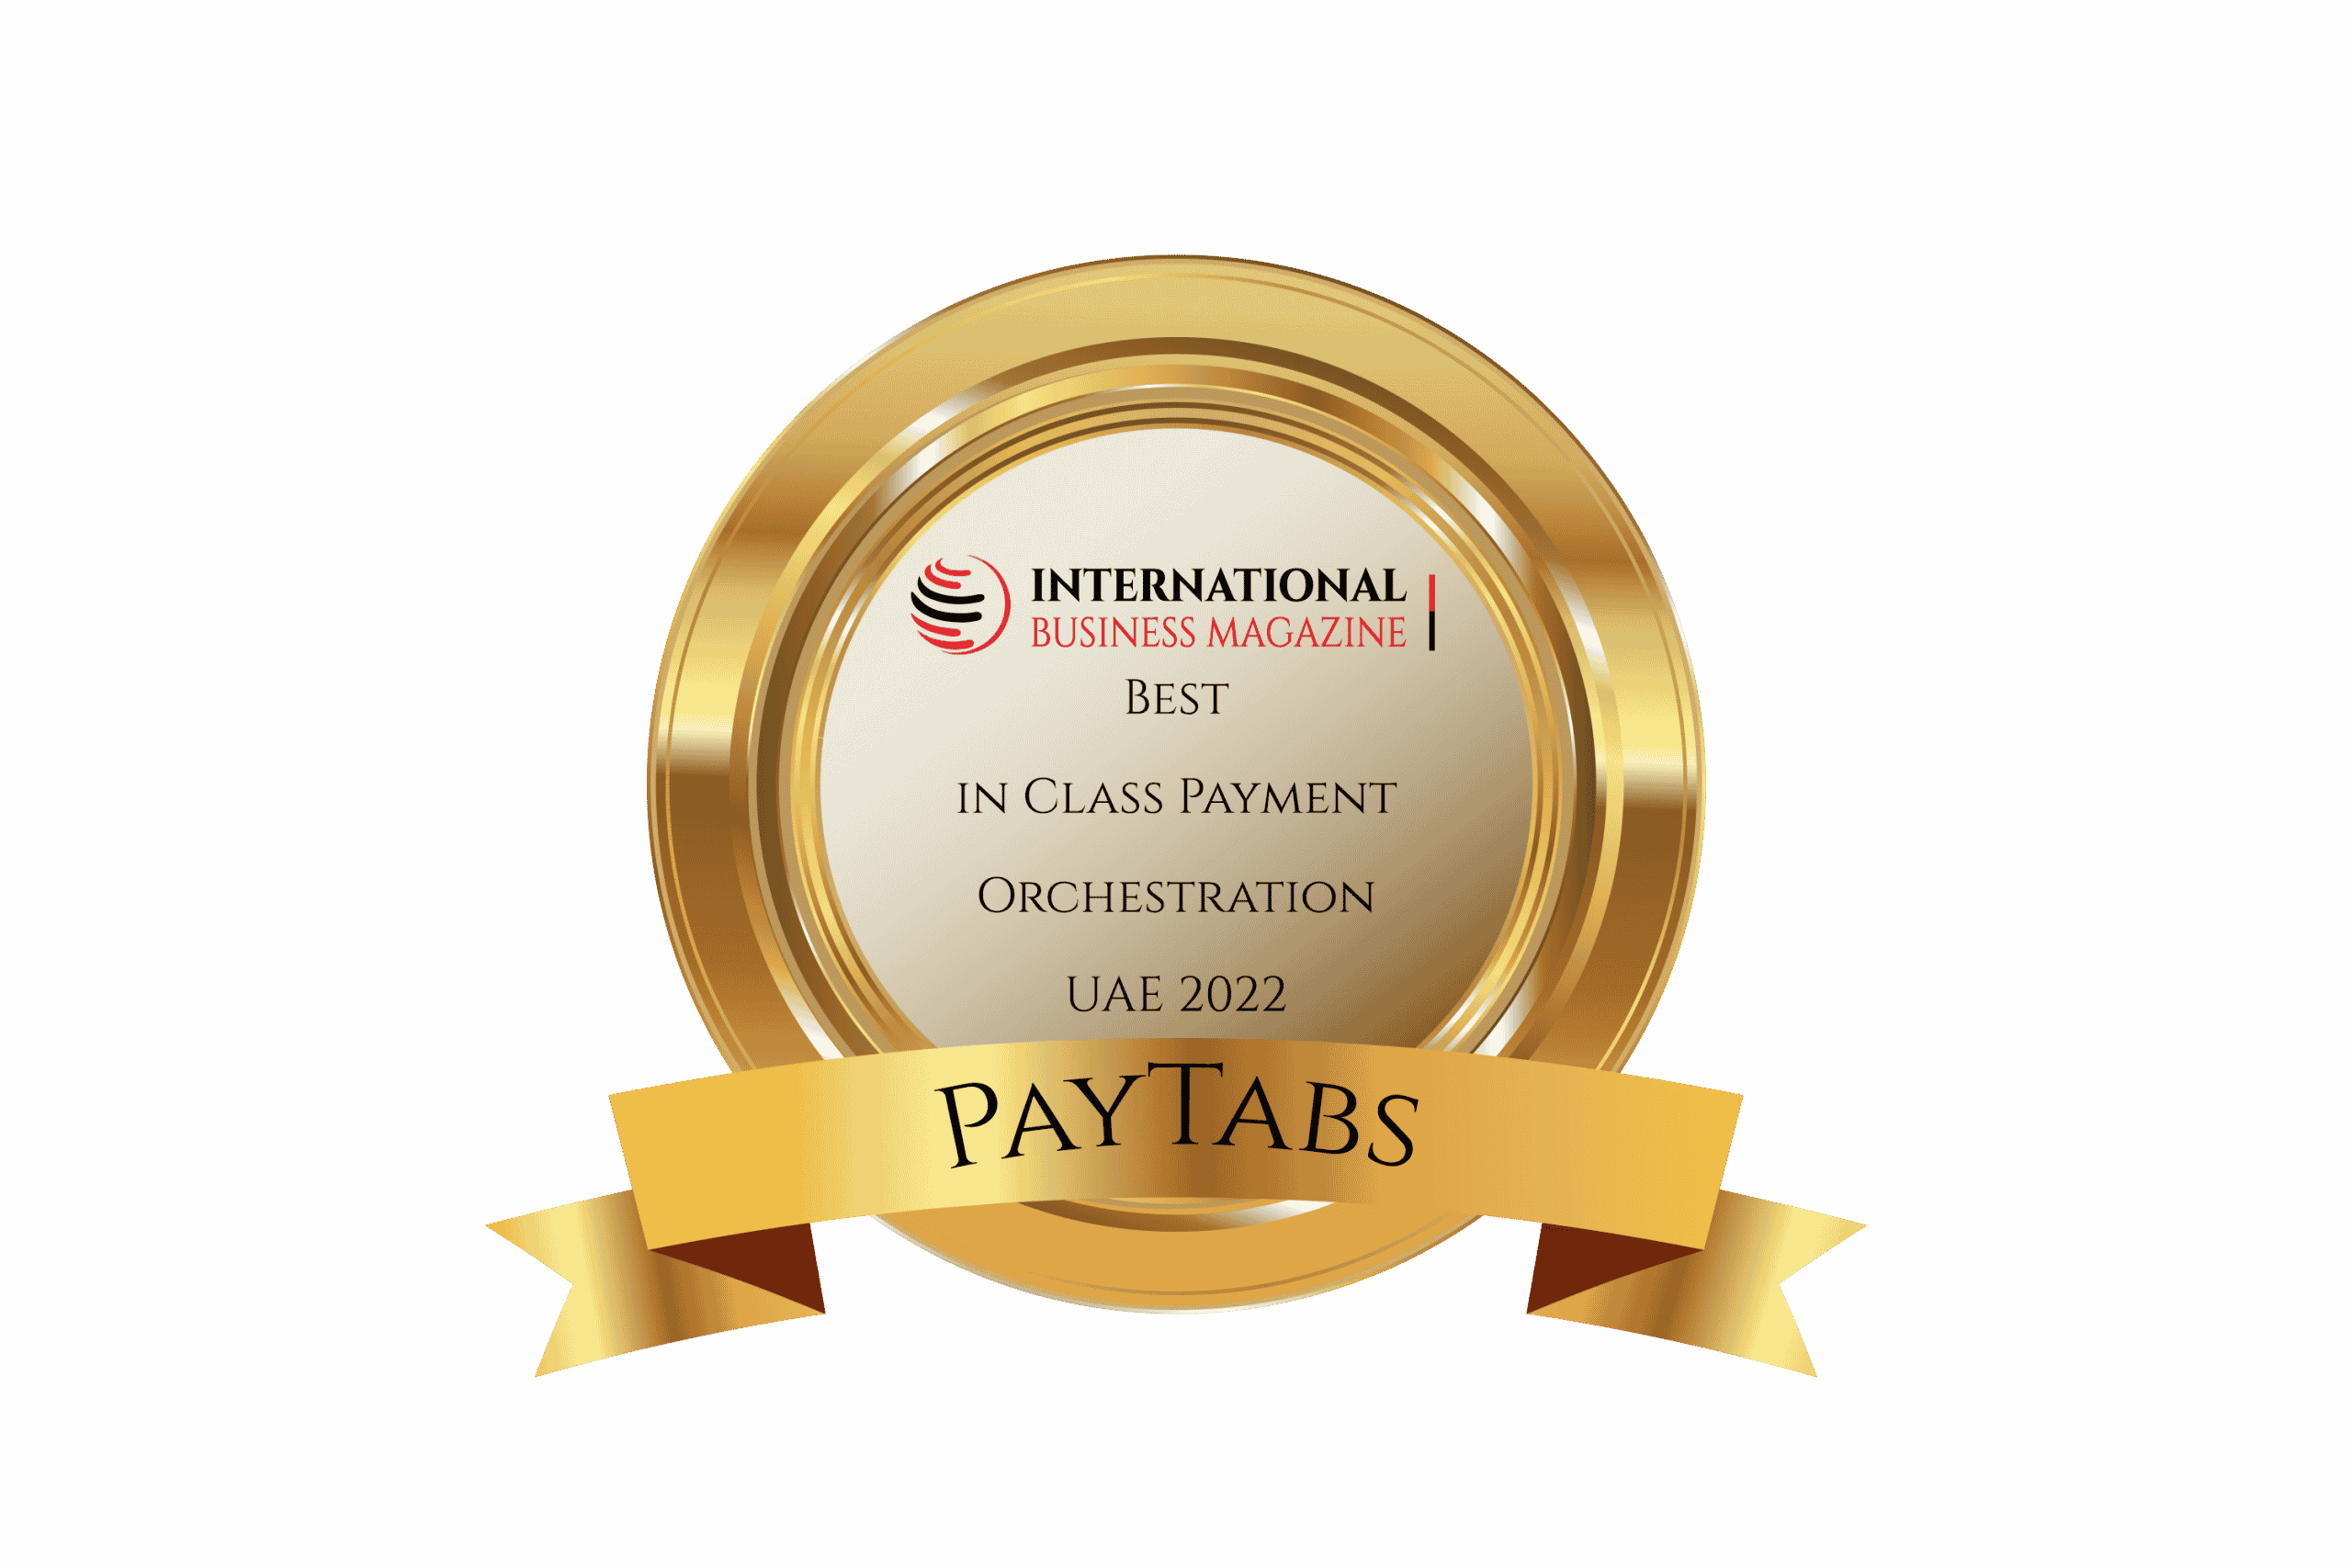 Best in Class Payment Orchestration – International Business Magazine